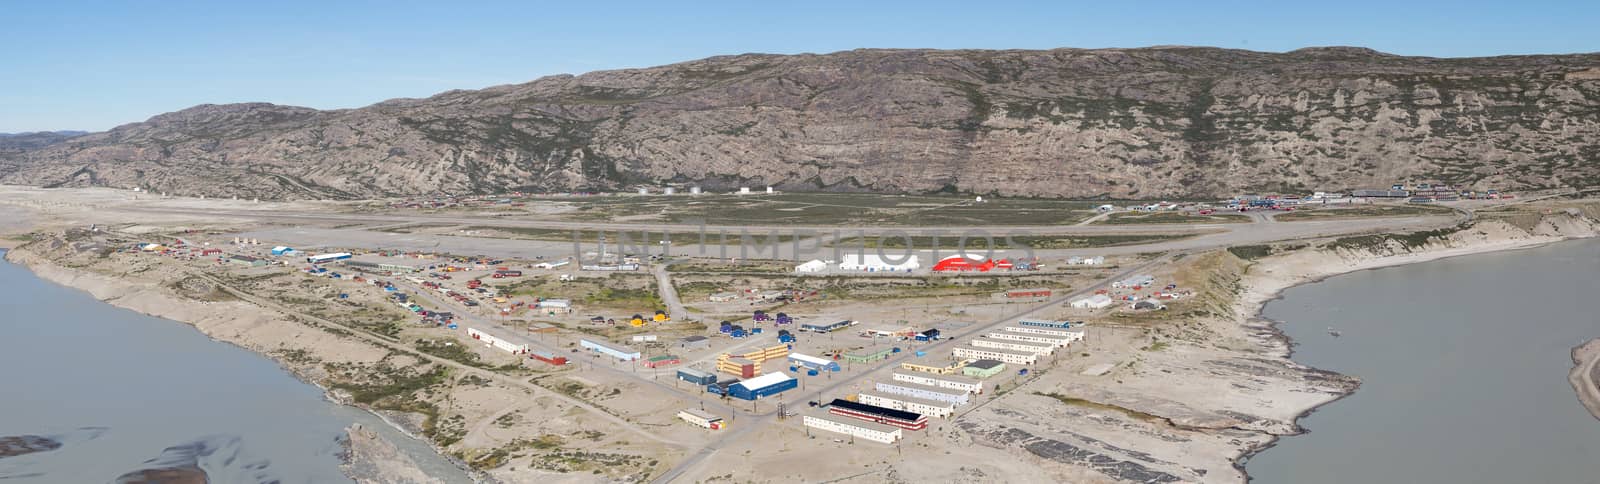 Kangerlussuaq, Greenland - July 13, 2018: Panoramic view of the village with the international airport, which is Greenland's main air transport hub.